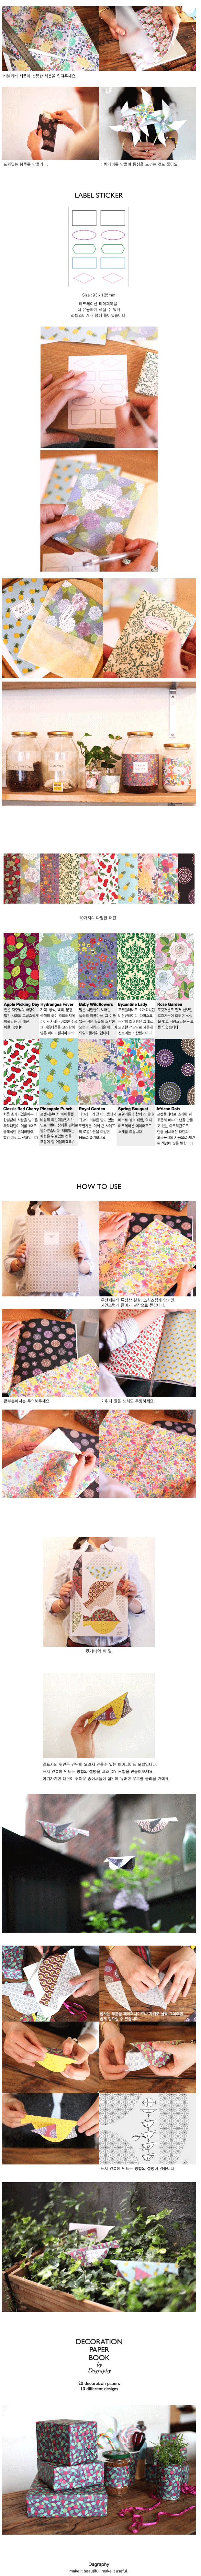 Dagraphy's Decoration Paper Book [dagraphy, korean stationery, craft paper, deco paper]